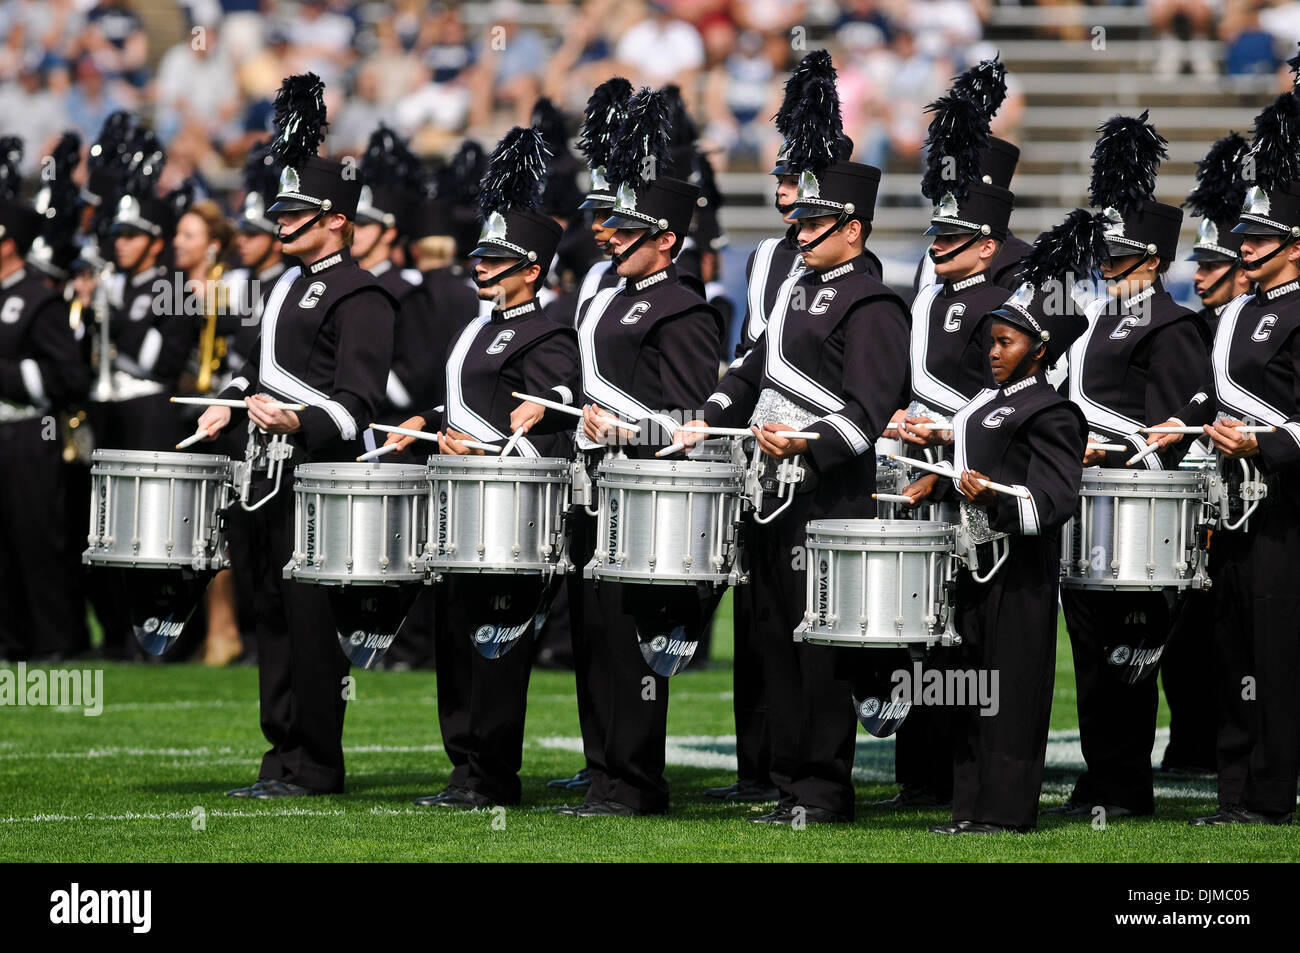 Sept. 25, 2010 - East Hartford, Connecticut, United States of America - The UConn Marching Band Drumline performs during pre game festivities. UConn defeated Buffalo 45 - 21 at Rentschler Field. (Credit Image: © Geoff Bolte/Southcreek Global/ZUMApress.com) Stock Photo